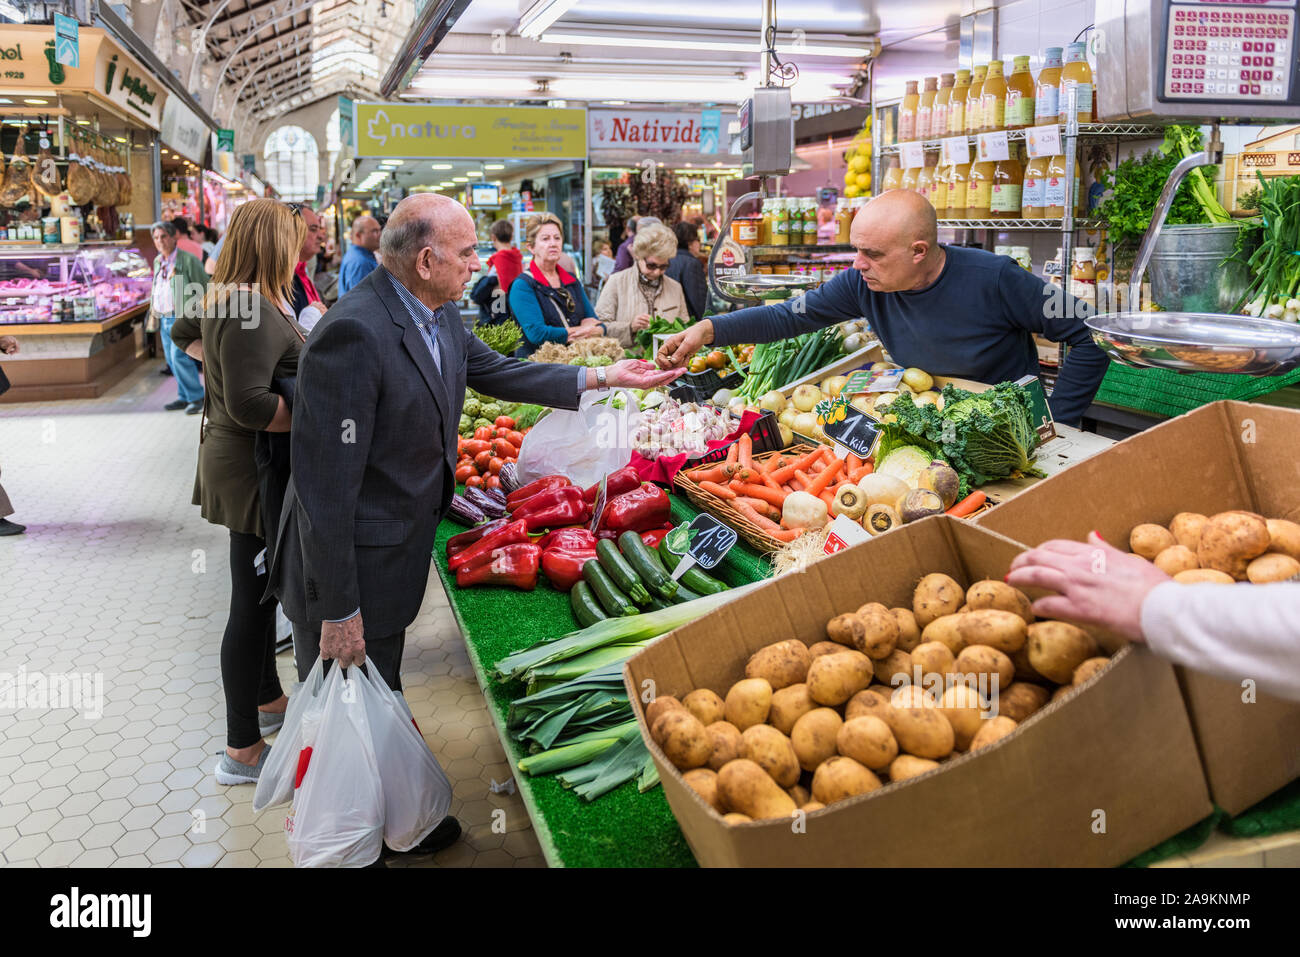 Man receives change after buying groceries at a merchants place in the Mercado Central (Central Market) in Valencia Spain Stock Photo